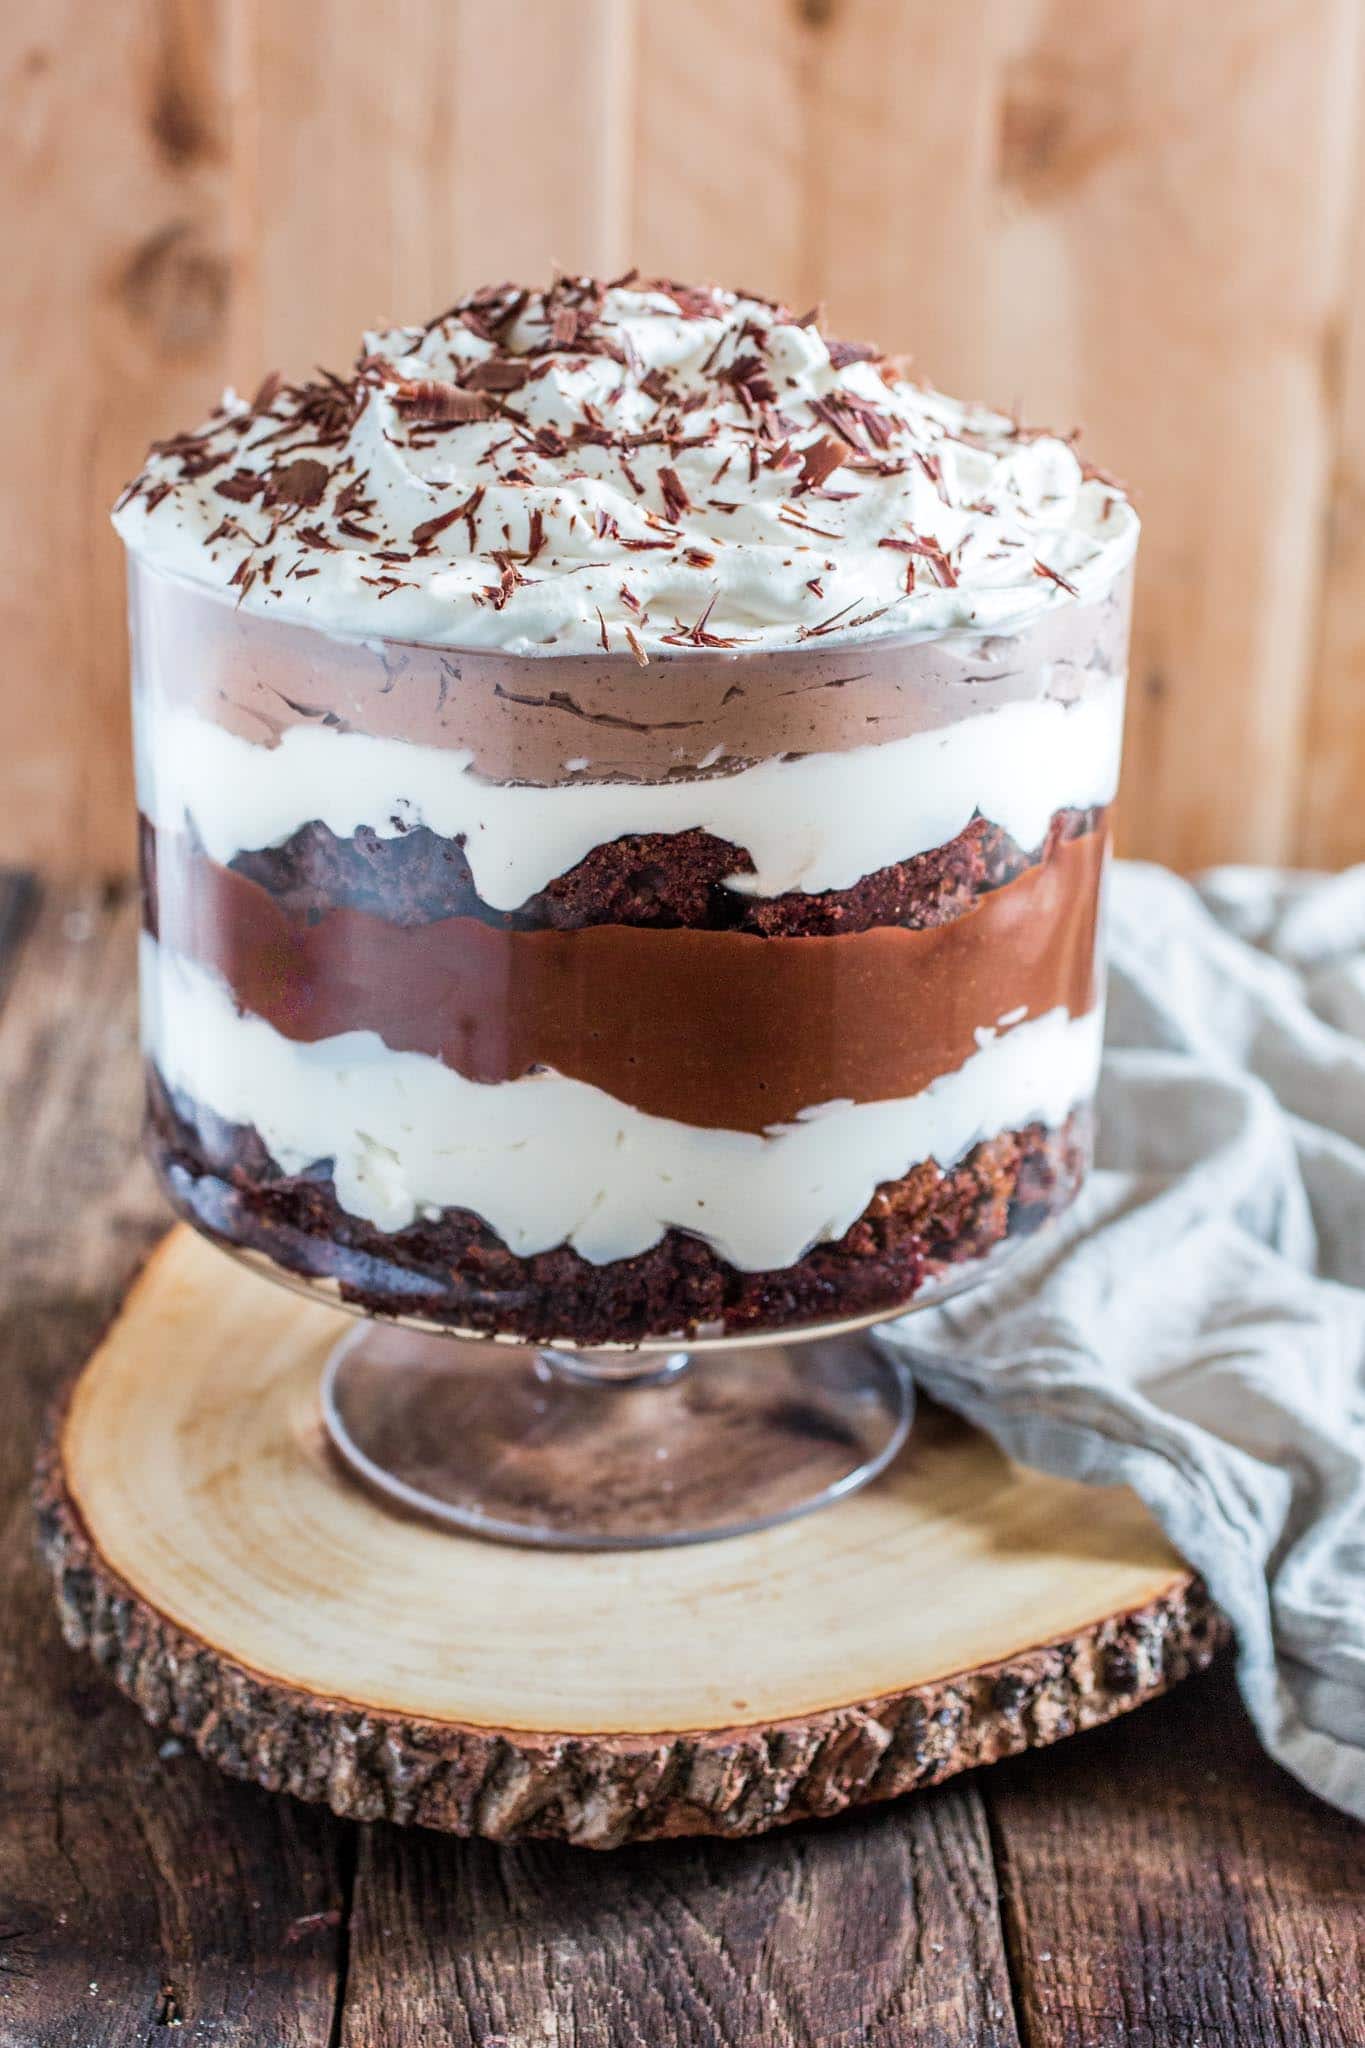 A trifle dish full of layeres of brownies, whipped cream, and chocolate pudding. The top is whipped cream sprinkled with chocolate shavings.